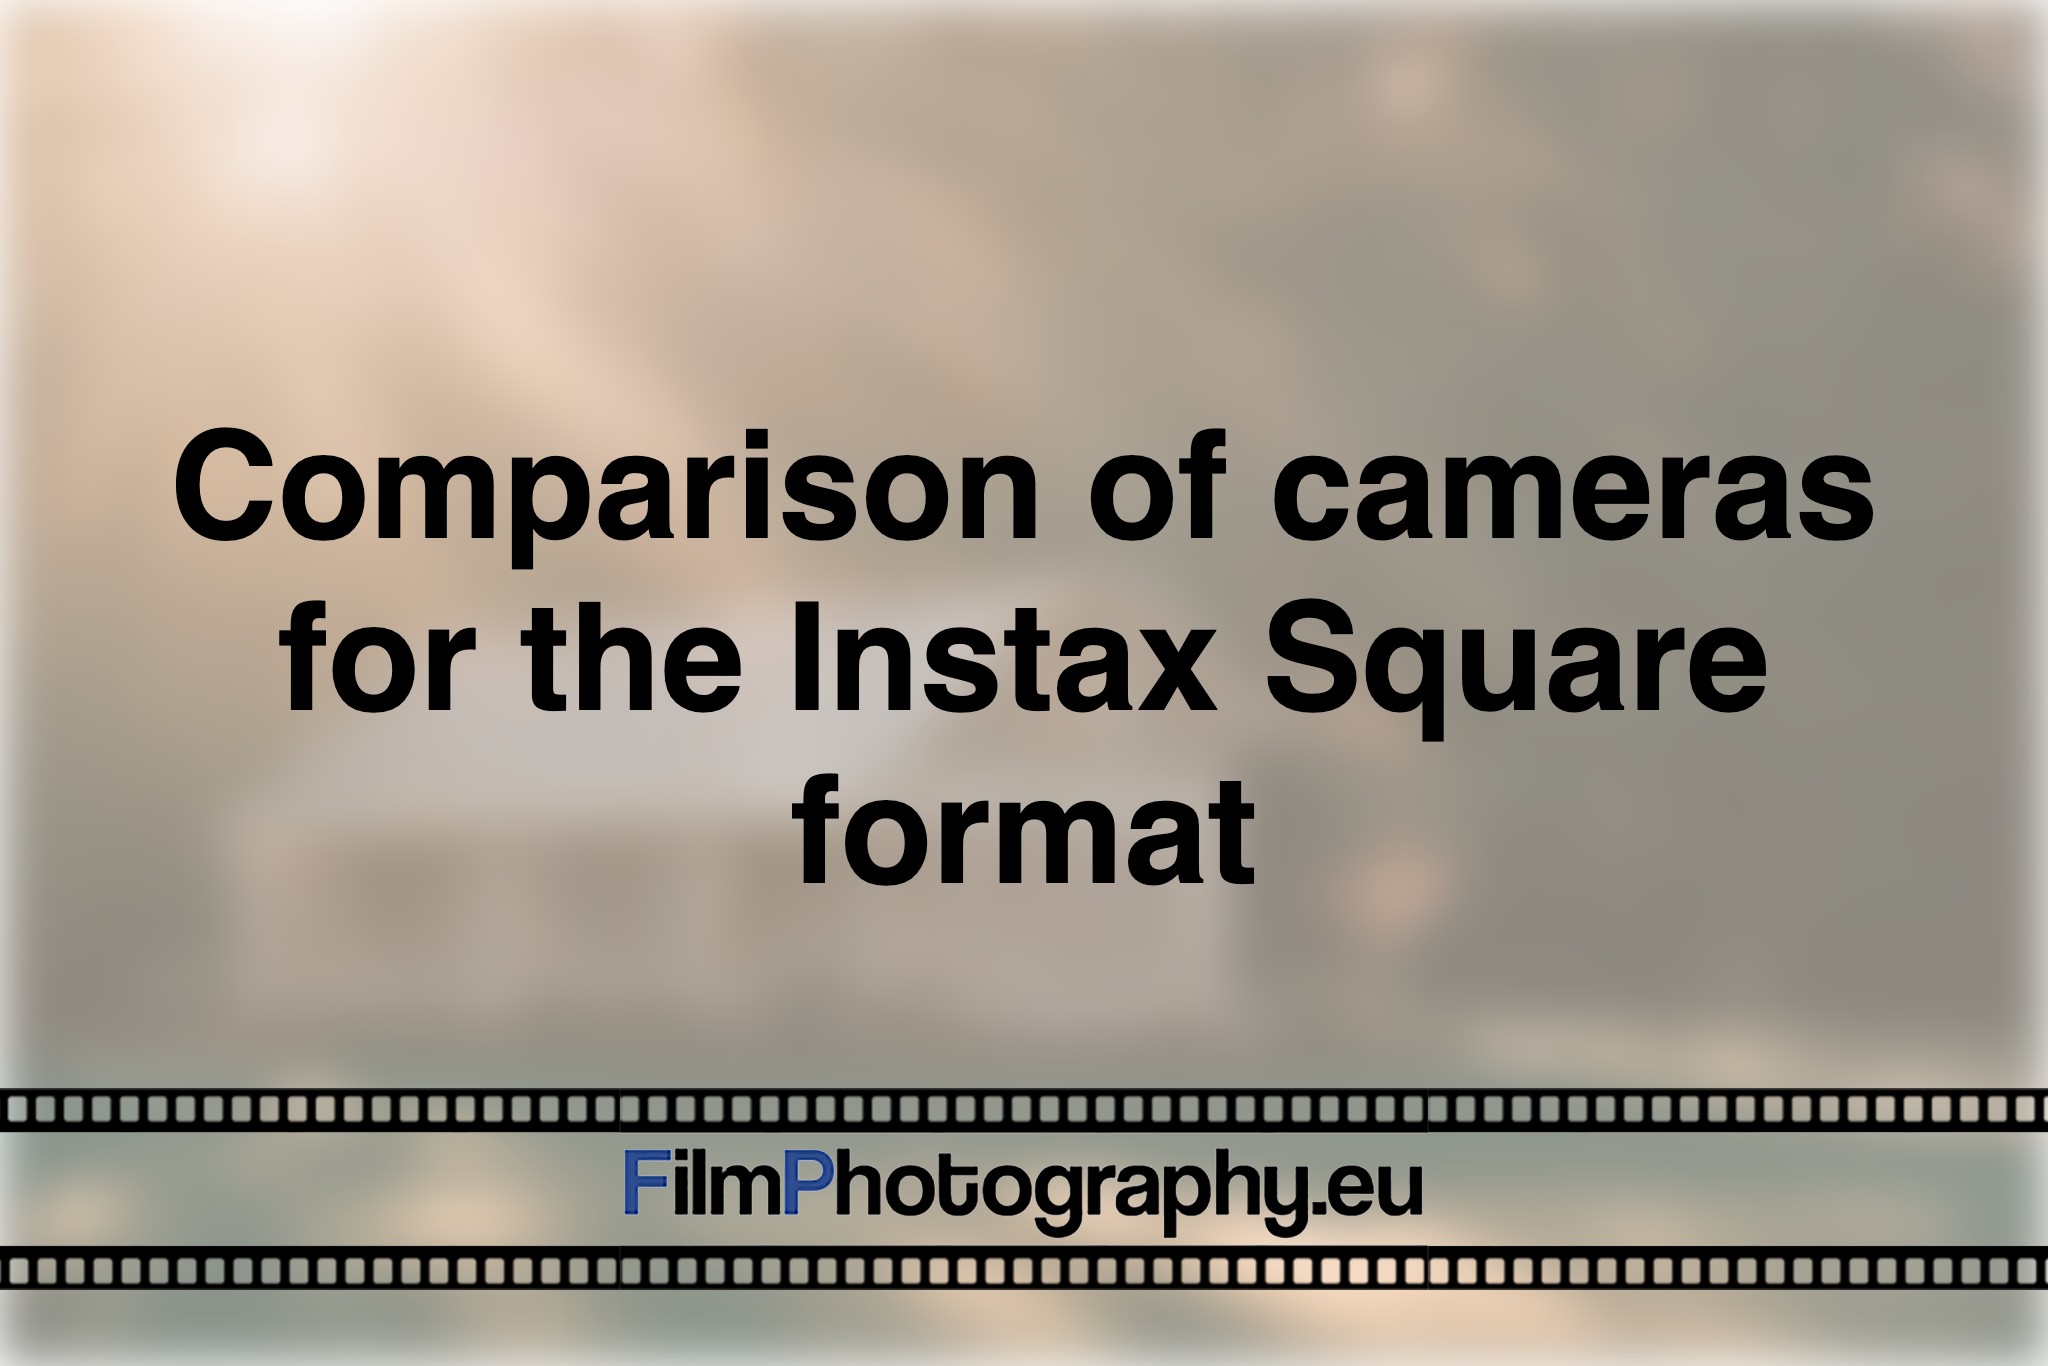 comparison-of-cameras-for-the-instax-square-format-photo-bnv